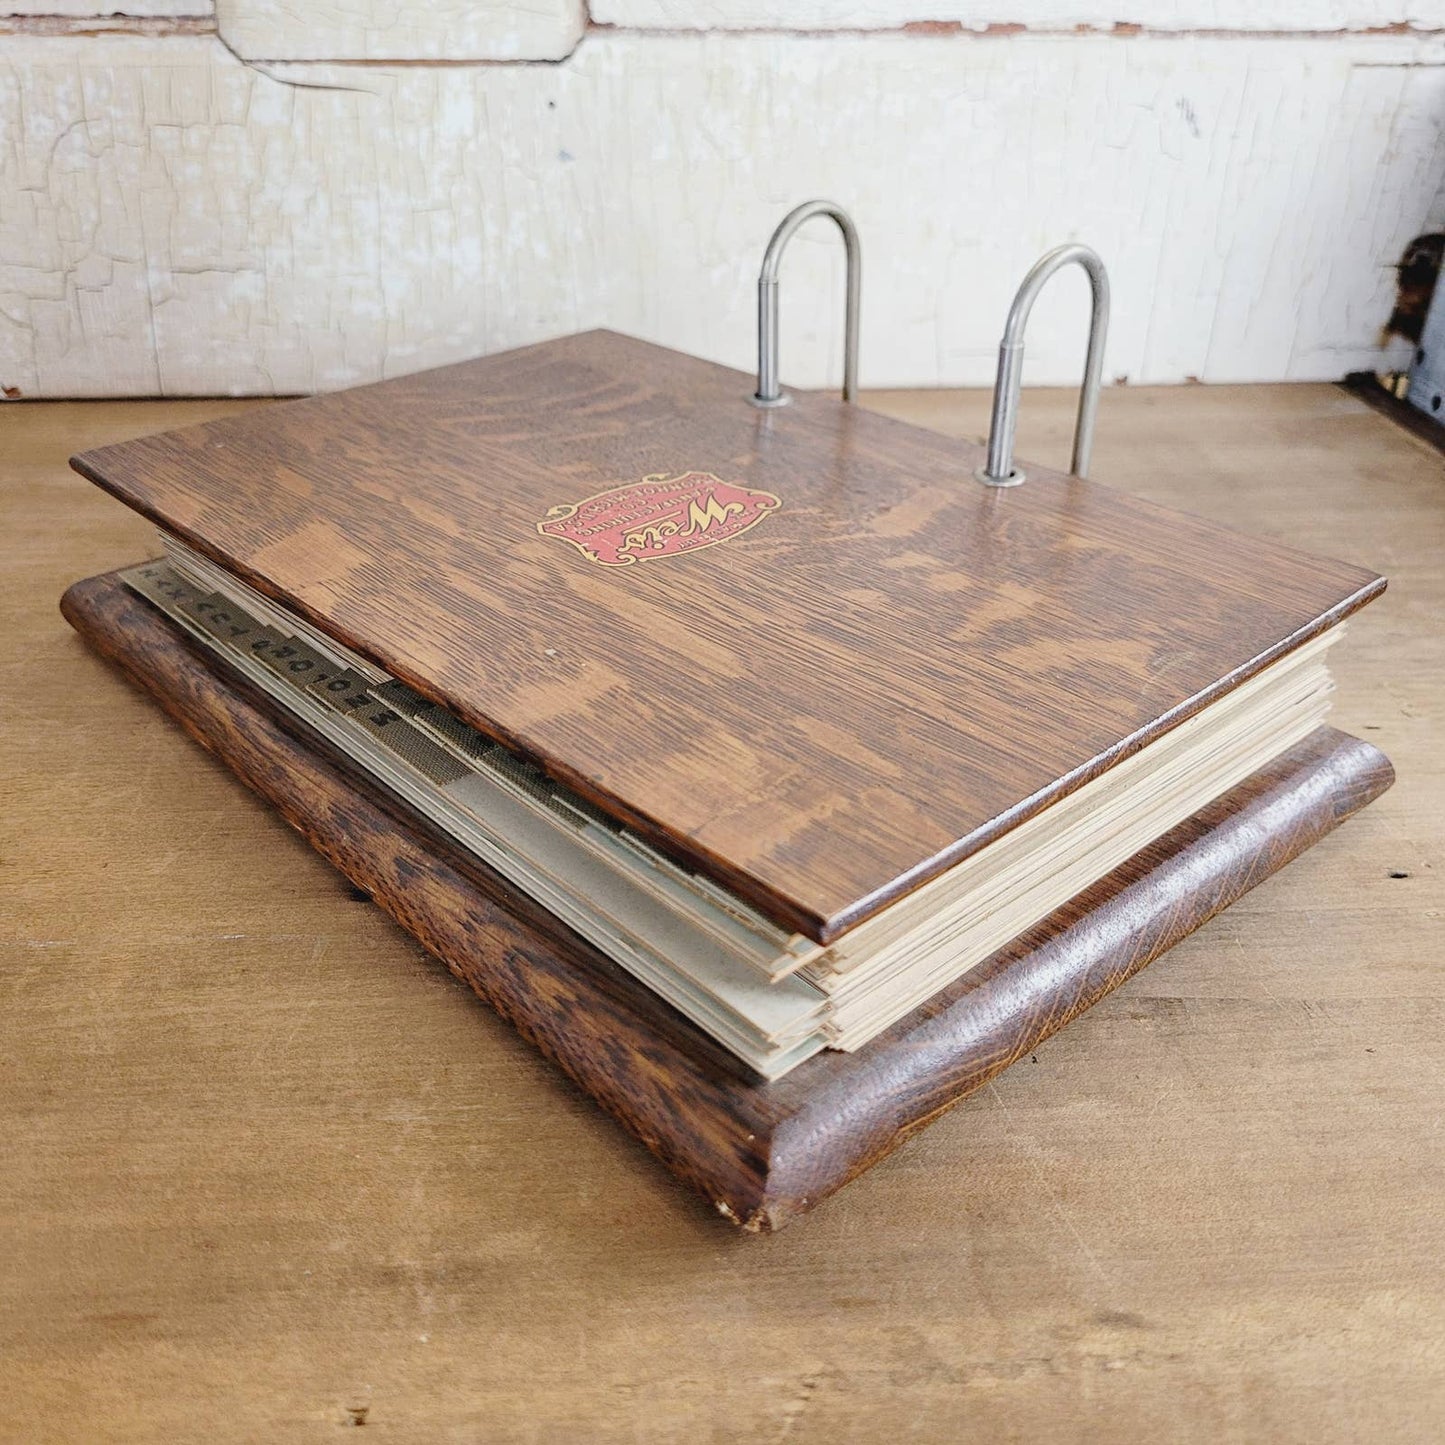 1920's Weis Manufacturing Co. Monroe Michigan Wood Desktop Ledger Book w/Pages